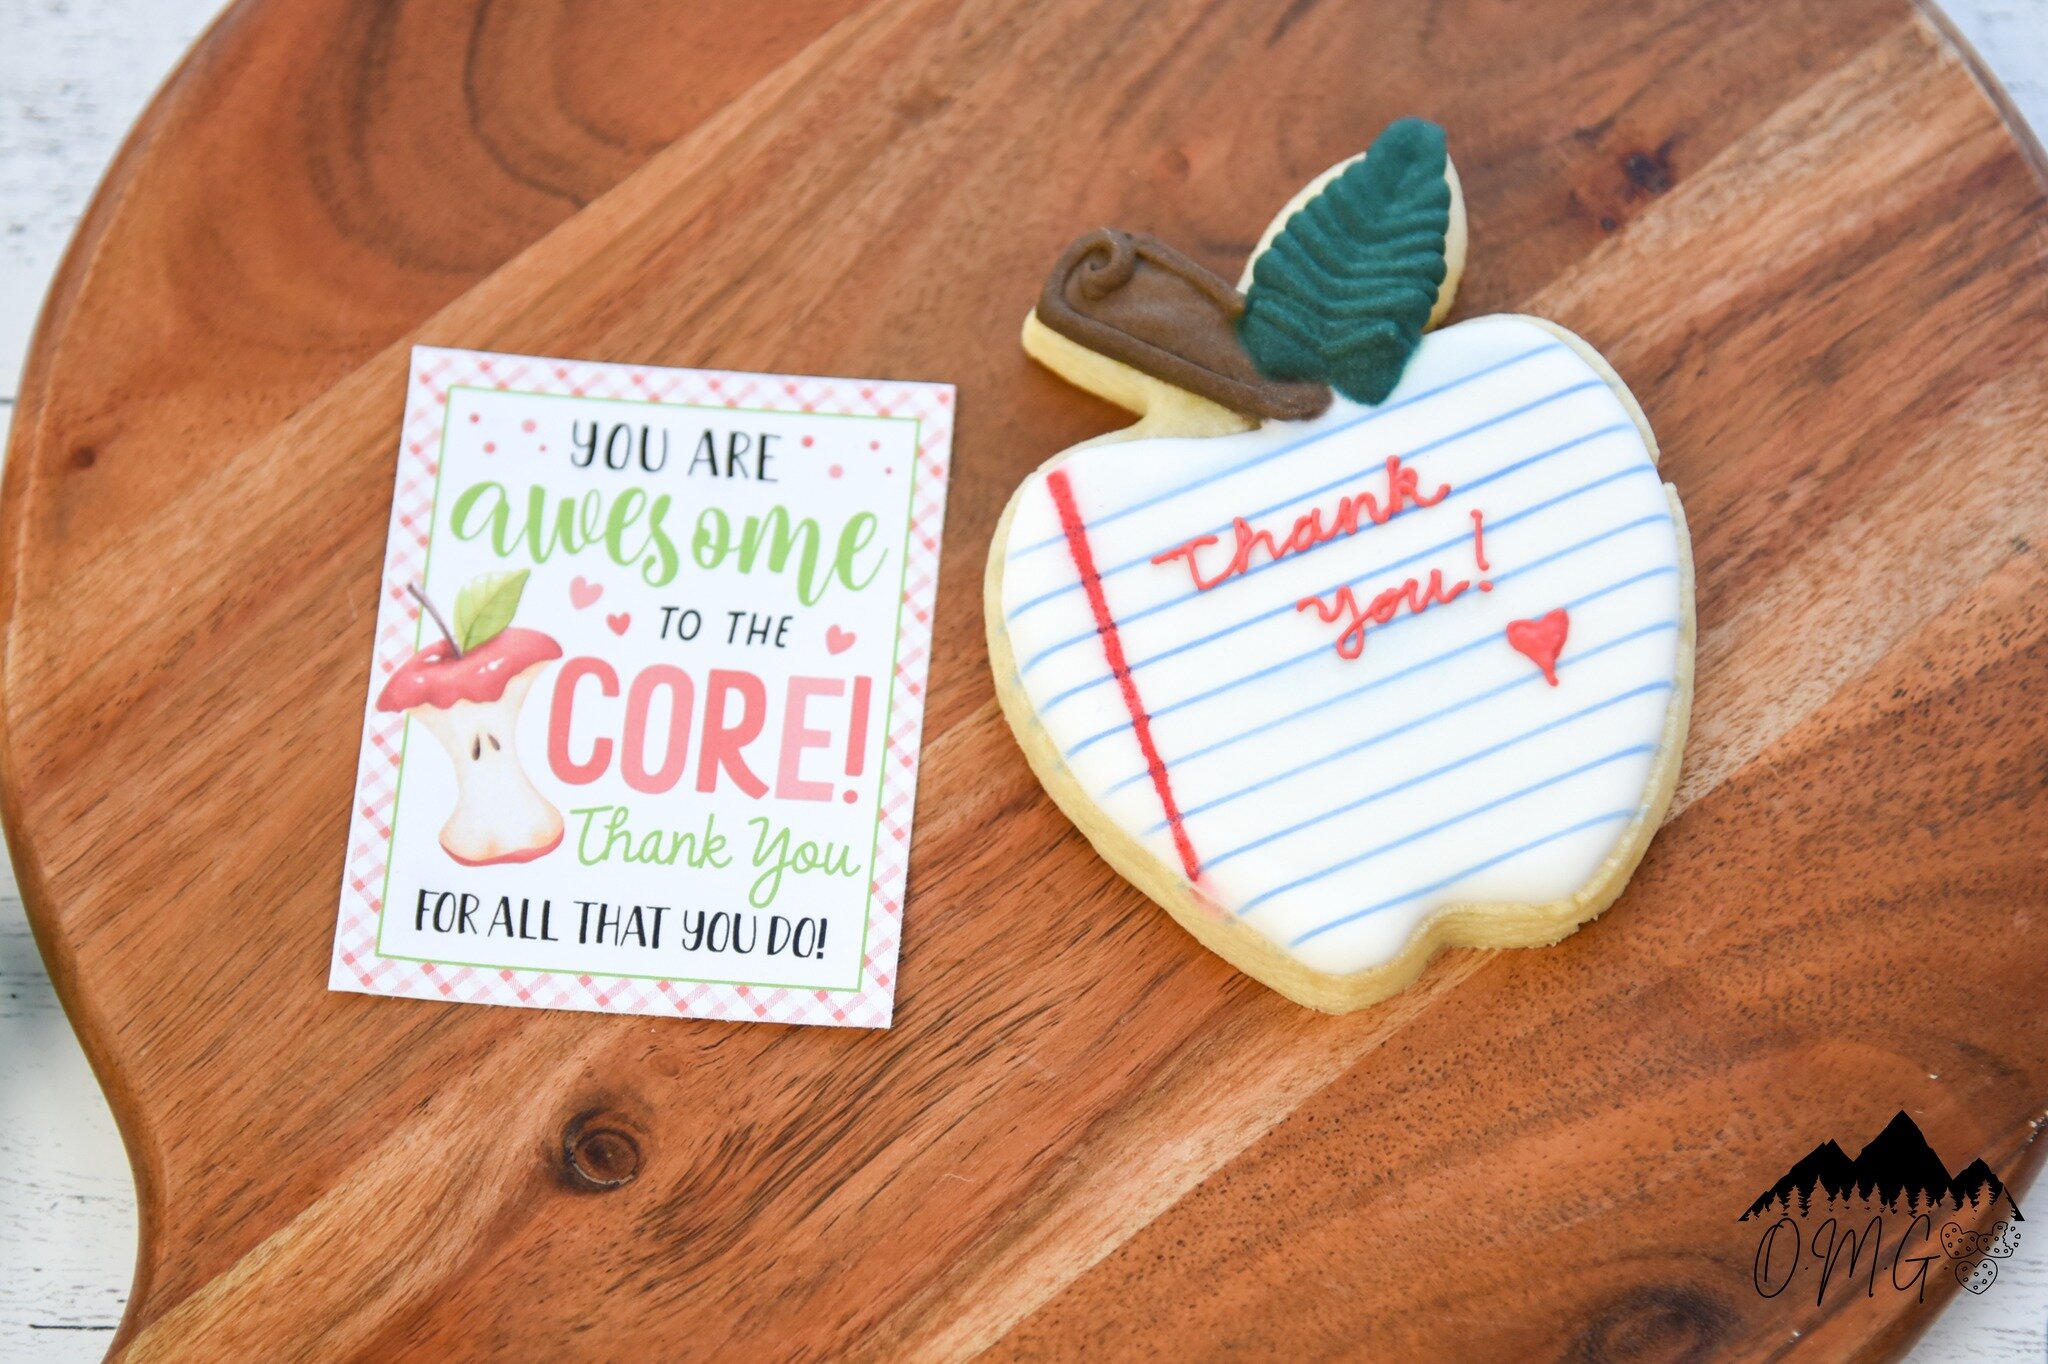 🍎💌 BACK TO SCHOOL SPECIAL: THANK YOU APPLE COOKIES 🍎💌

Hey there, all you amazing teachers out there! 🎉 Are you ready to kick off another incredible school year? We've got something special just for you - our delightful apple shaped sugar cookie